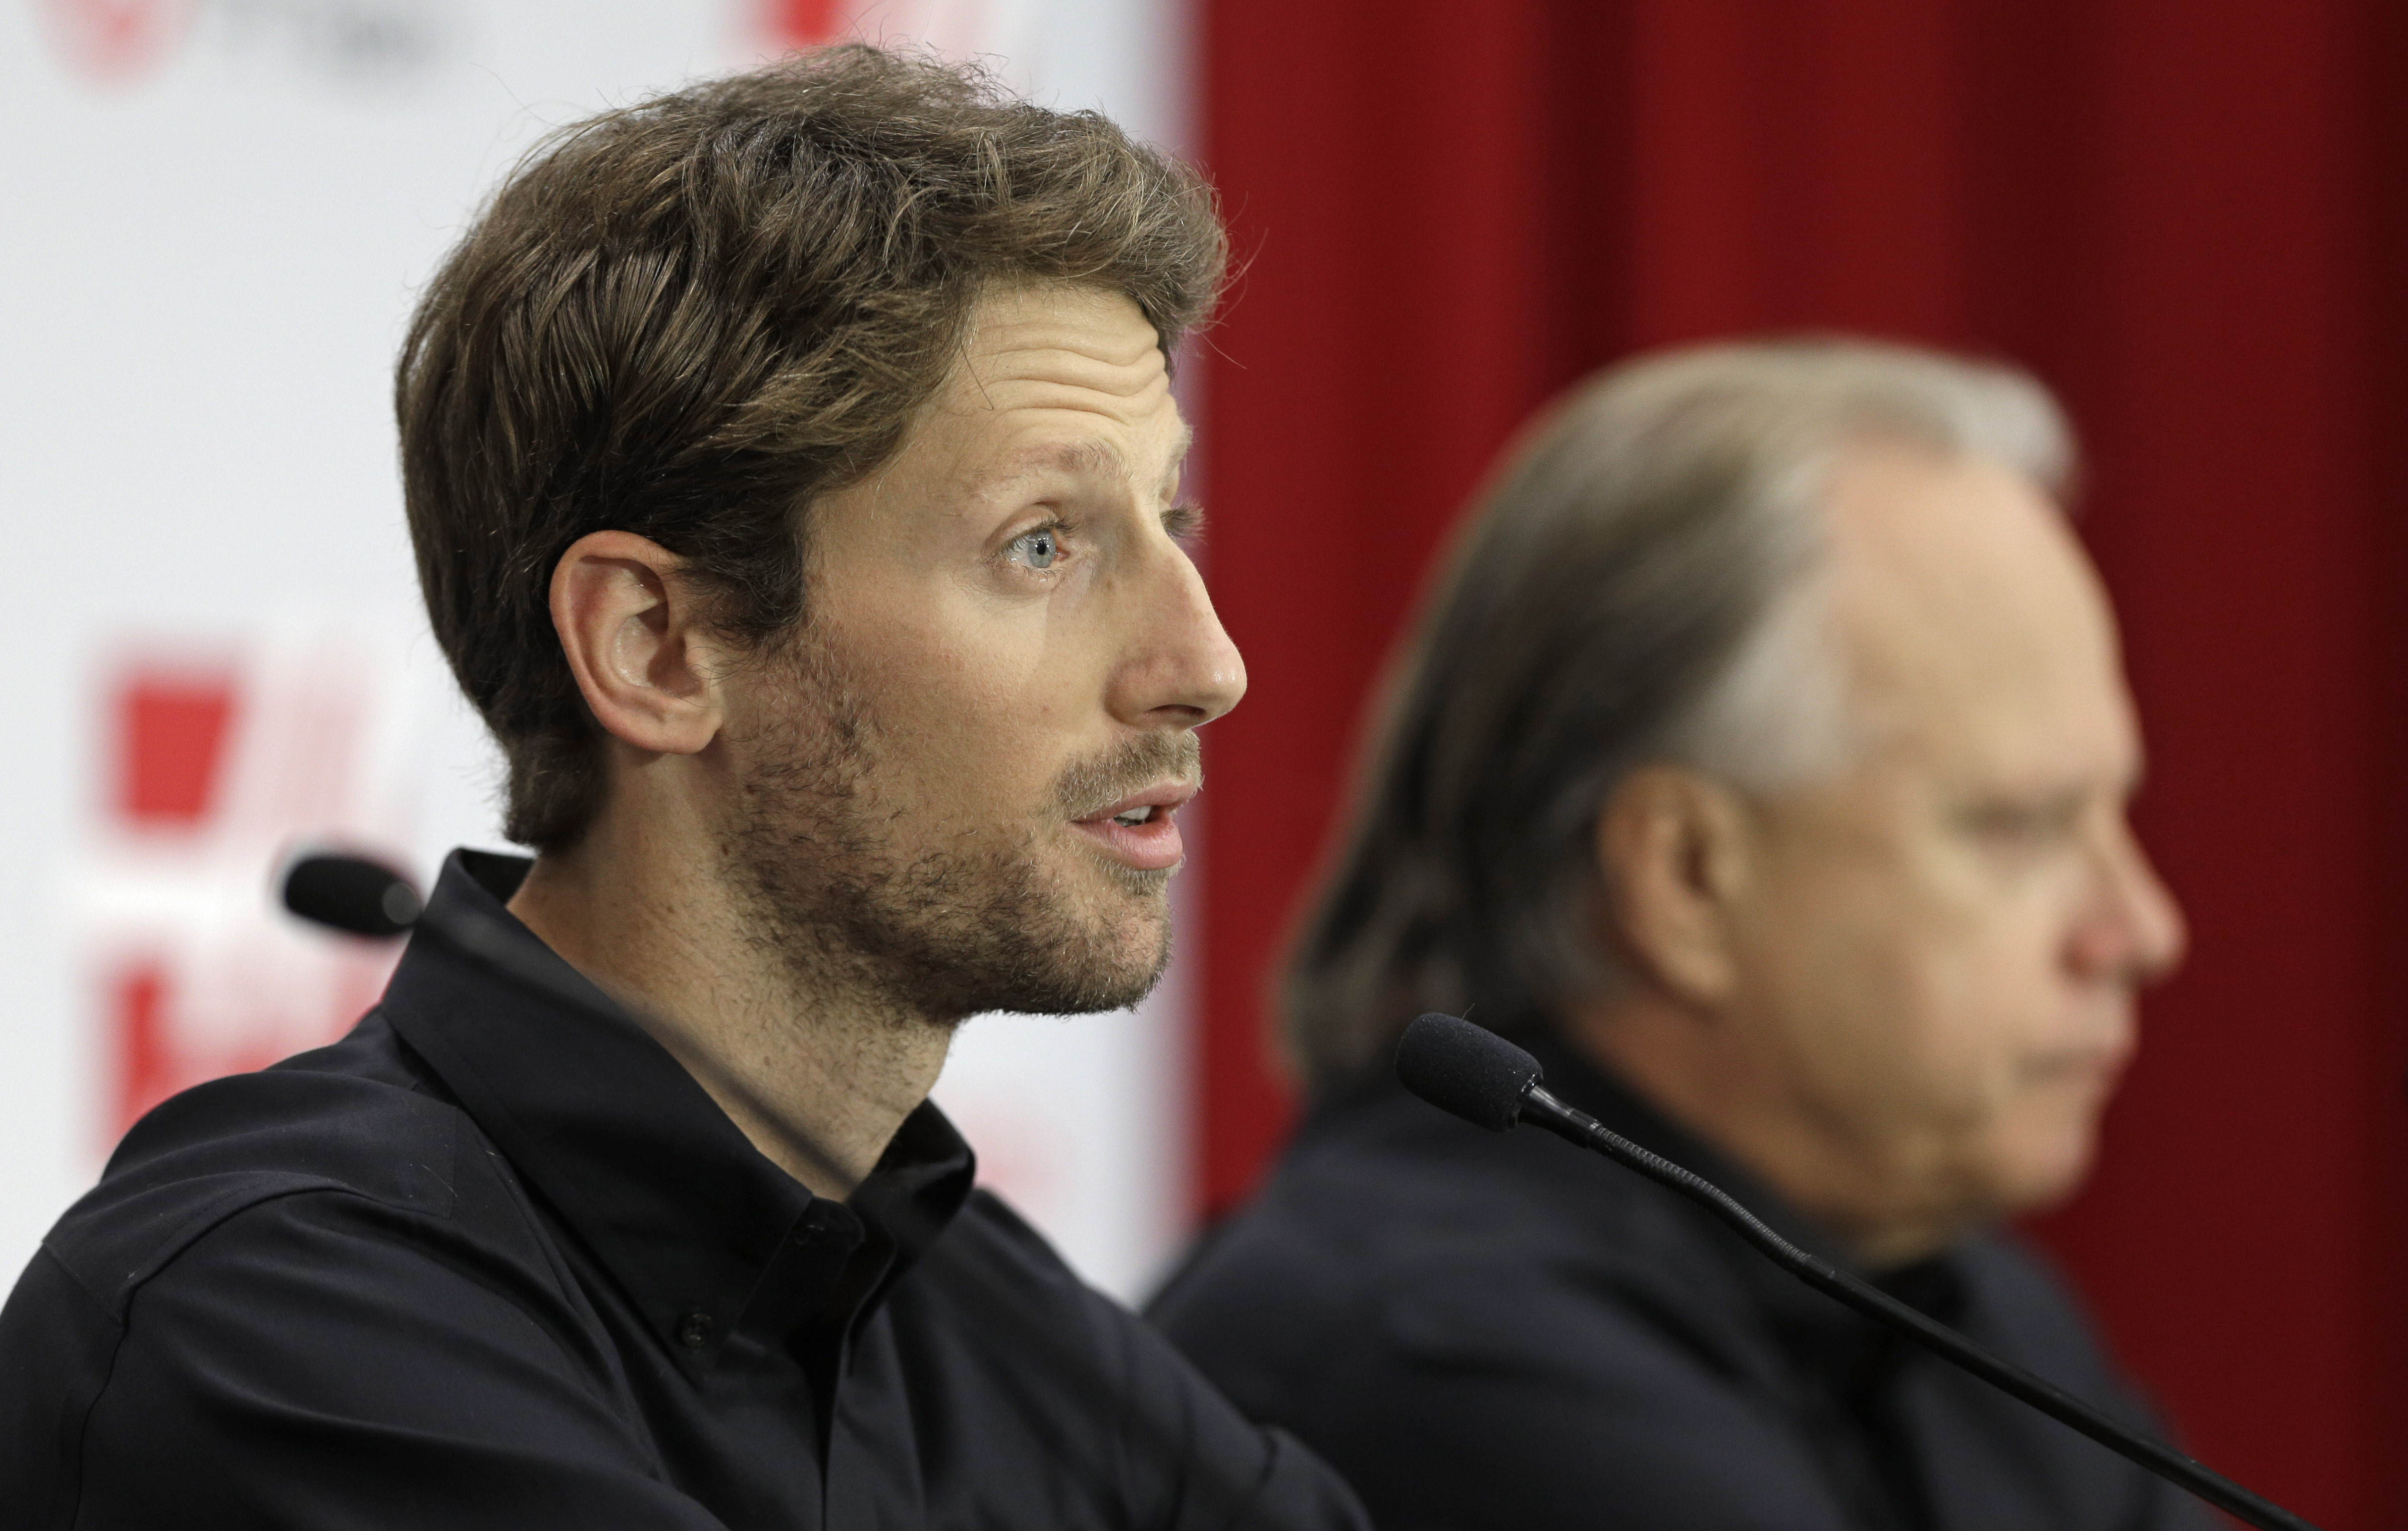 Driver Romain Grosjean, left, answers a question as team owner Gene Haas, right, listens during a news conference for Haas Racing's Formula One auto race team in Kannapolis, N.C., Tuesday, Sept. 29, 2015. (AP Photo/Chuck Burton)